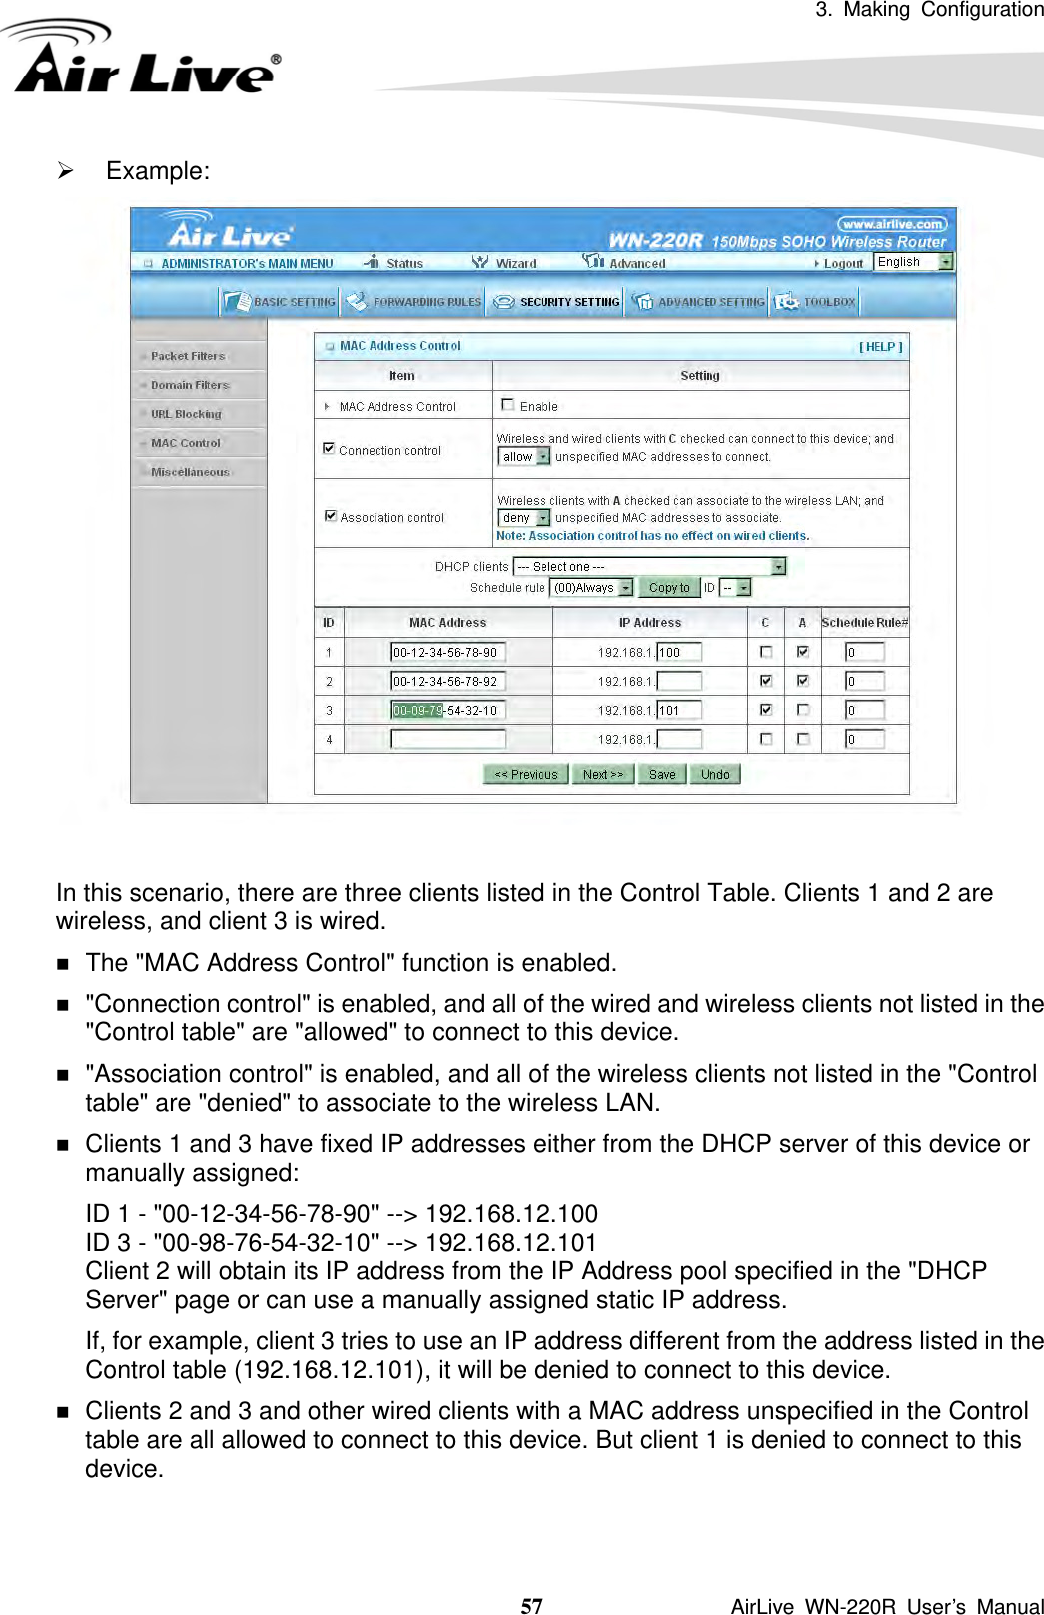 3. Making Configuration  57               AirLive WN-220R User’s Manual ¾ Example:   In this scenario, there are three clients listed in the Control Table. Clients 1 and 2 are wireless, and client 3 is wired.    The &quot;MAC Address Control&quot; function is enabled.    &quot;Connection control&quot; is enabled, and all of the wired and wireless clients not listed in the &quot;Control table&quot; are &quot;allowed&quot; to connect to this device.    &quot;Association control&quot; is enabled, and all of the wireless clients not listed in the &quot;Control table&quot; are &quot;denied&quot; to associate to the wireless LAN.    Clients 1 and 3 have fixed IP addresses either from the DHCP server of this device or manually assigned: ID 1 - &quot;00-12-34-56-78-90&quot; --&gt; 192.168.12.100 ID 3 - &quot;00-98-76-54-32-10&quot; --&gt; 192.168.12.101 Client 2 will obtain its IP address from the IP Address pool specified in the &quot;DHCP Server&quot; page or can use a manually assigned static IP address. If, for example, client 3 tries to use an IP address different from the address listed in the Control table (192.168.12.101), it will be denied to connect to this device.    Clients 2 and 3 and other wired clients with a MAC address unspecified in the Control table are all allowed to connect to this device. But client 1 is denied to connect to this device.    